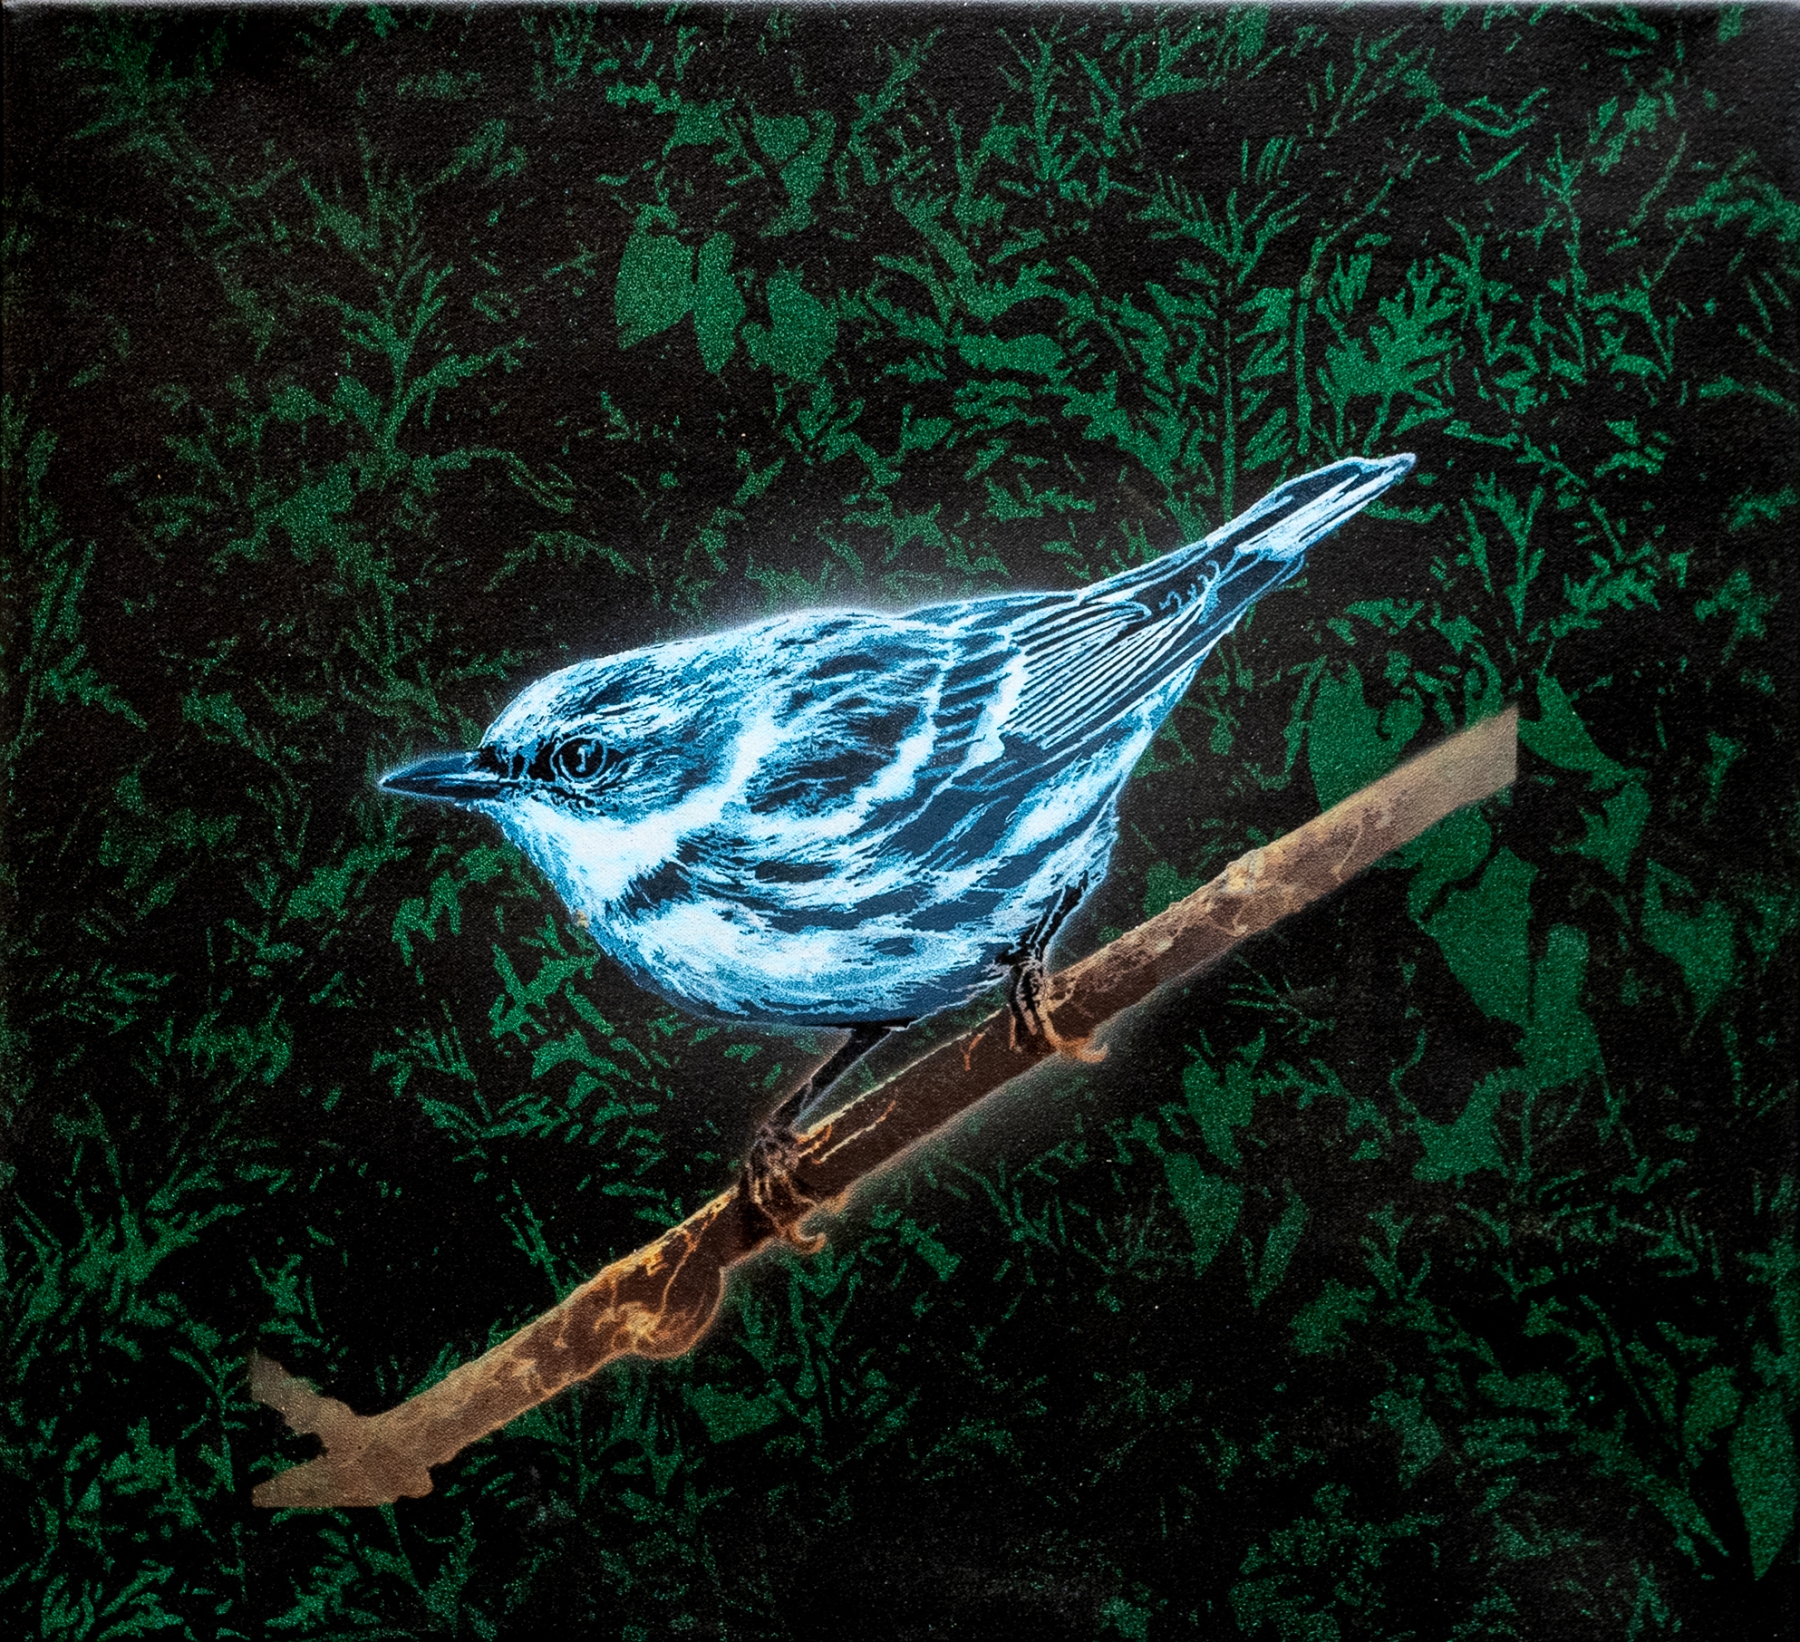 Cerulean Warbler, 2022
Painting on Canvas
22 x 20 in. (55.9 x 50.8 cm)
Signed and dated on verso